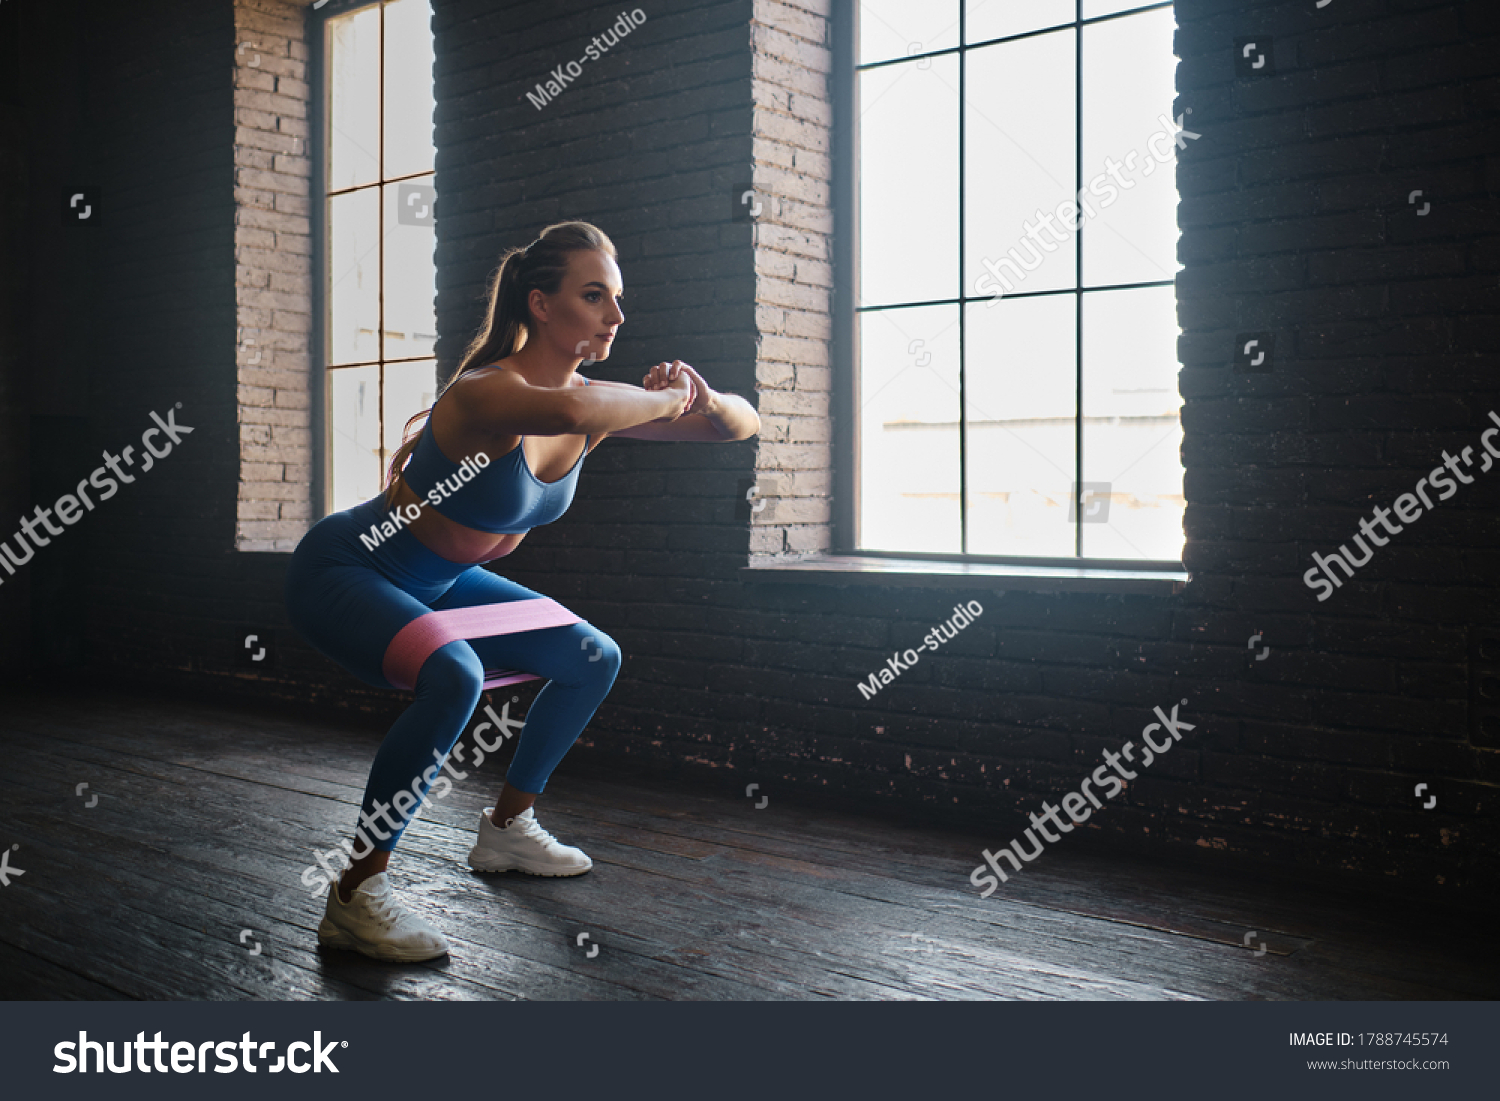 Crossfit healthy concept. Woman wearing sport clothing using resistance band #1788745574